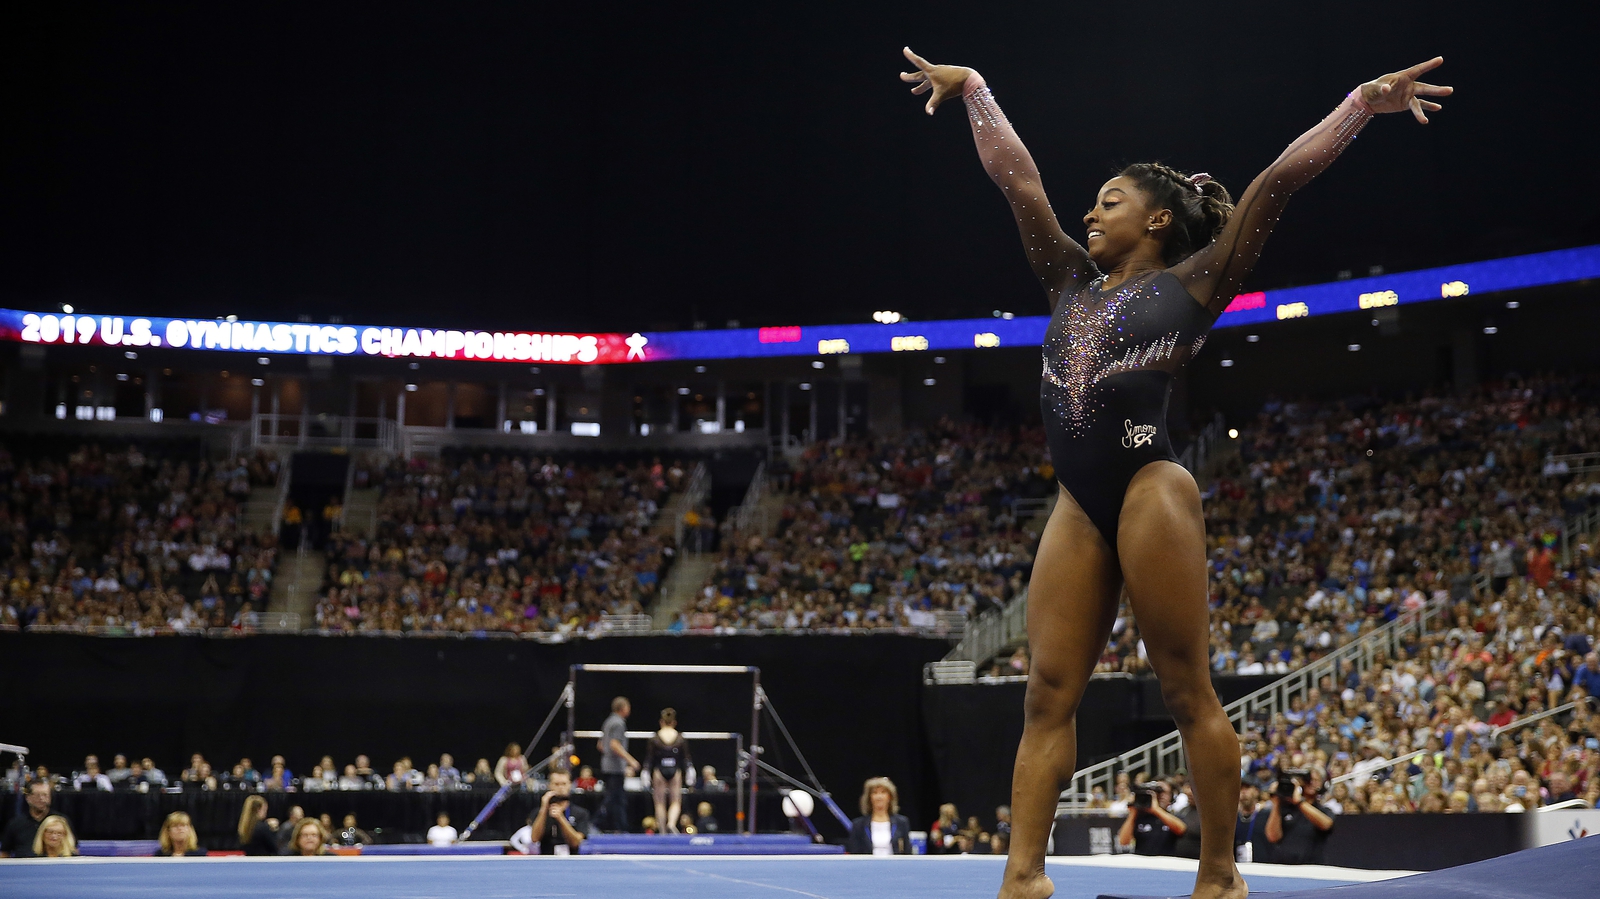 Simone Biles and Team USA ready to dazzle in women's team final